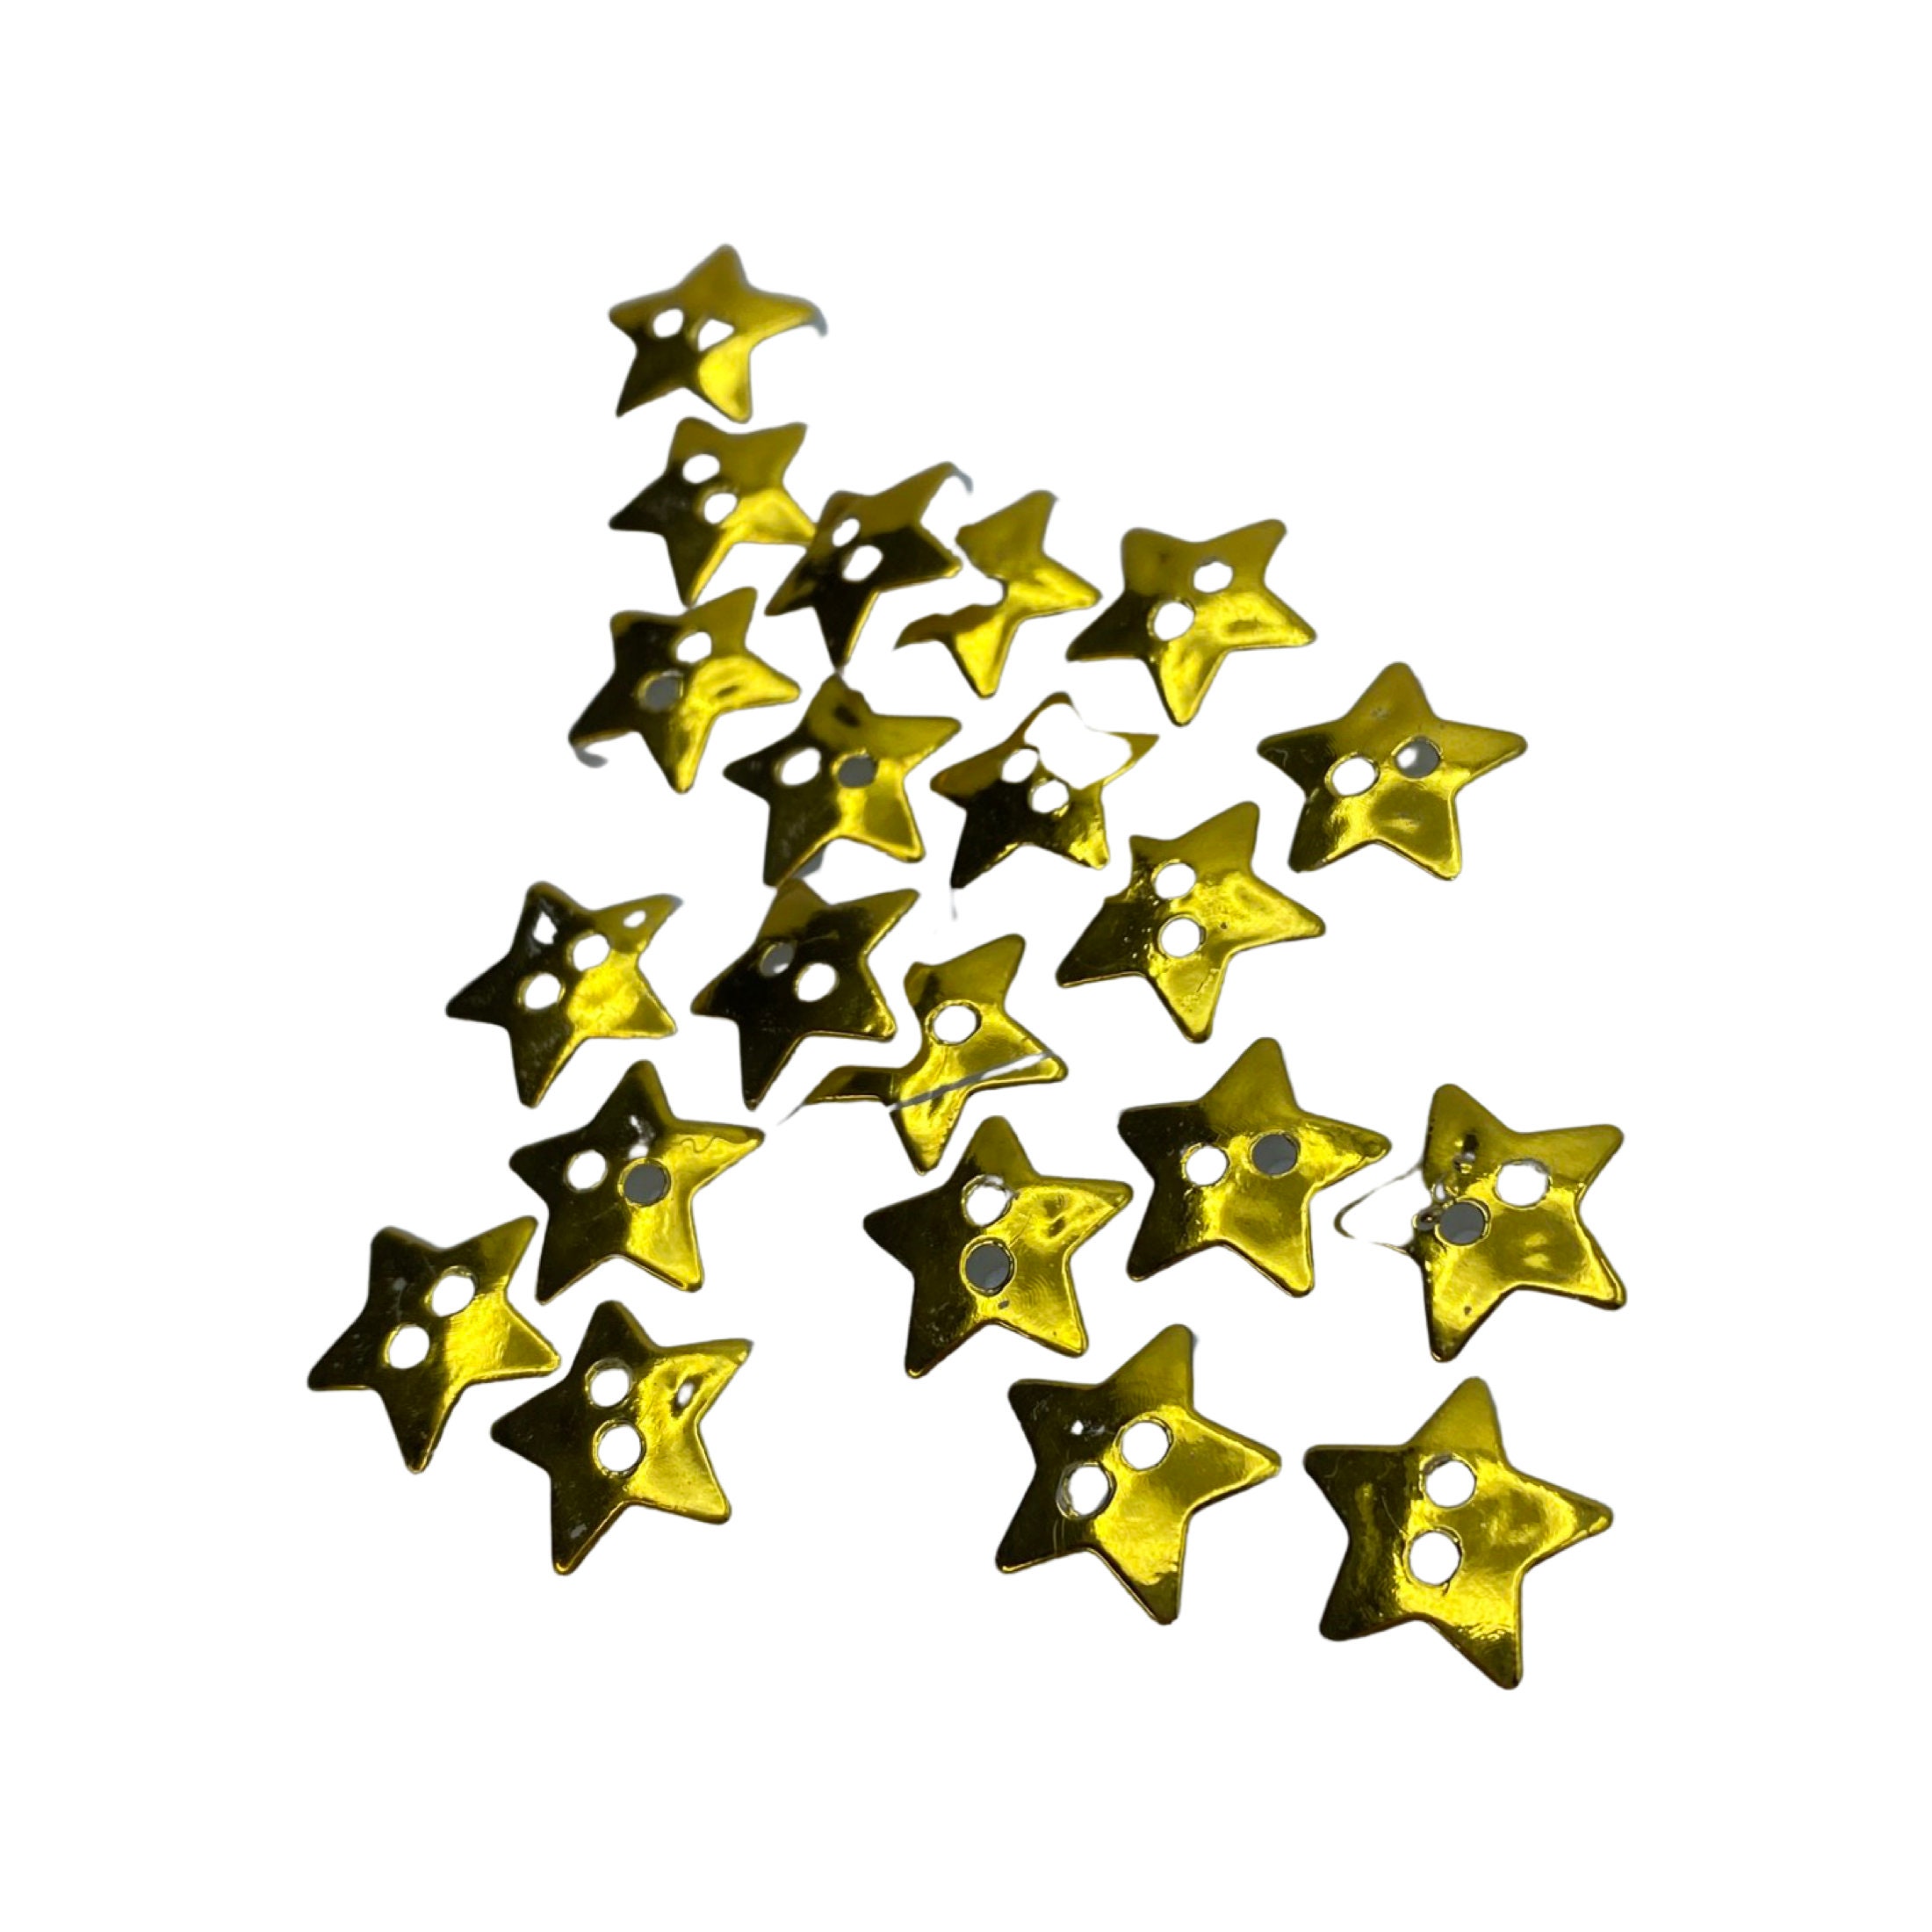 Set of 10 star shaped buttons - available in various colors